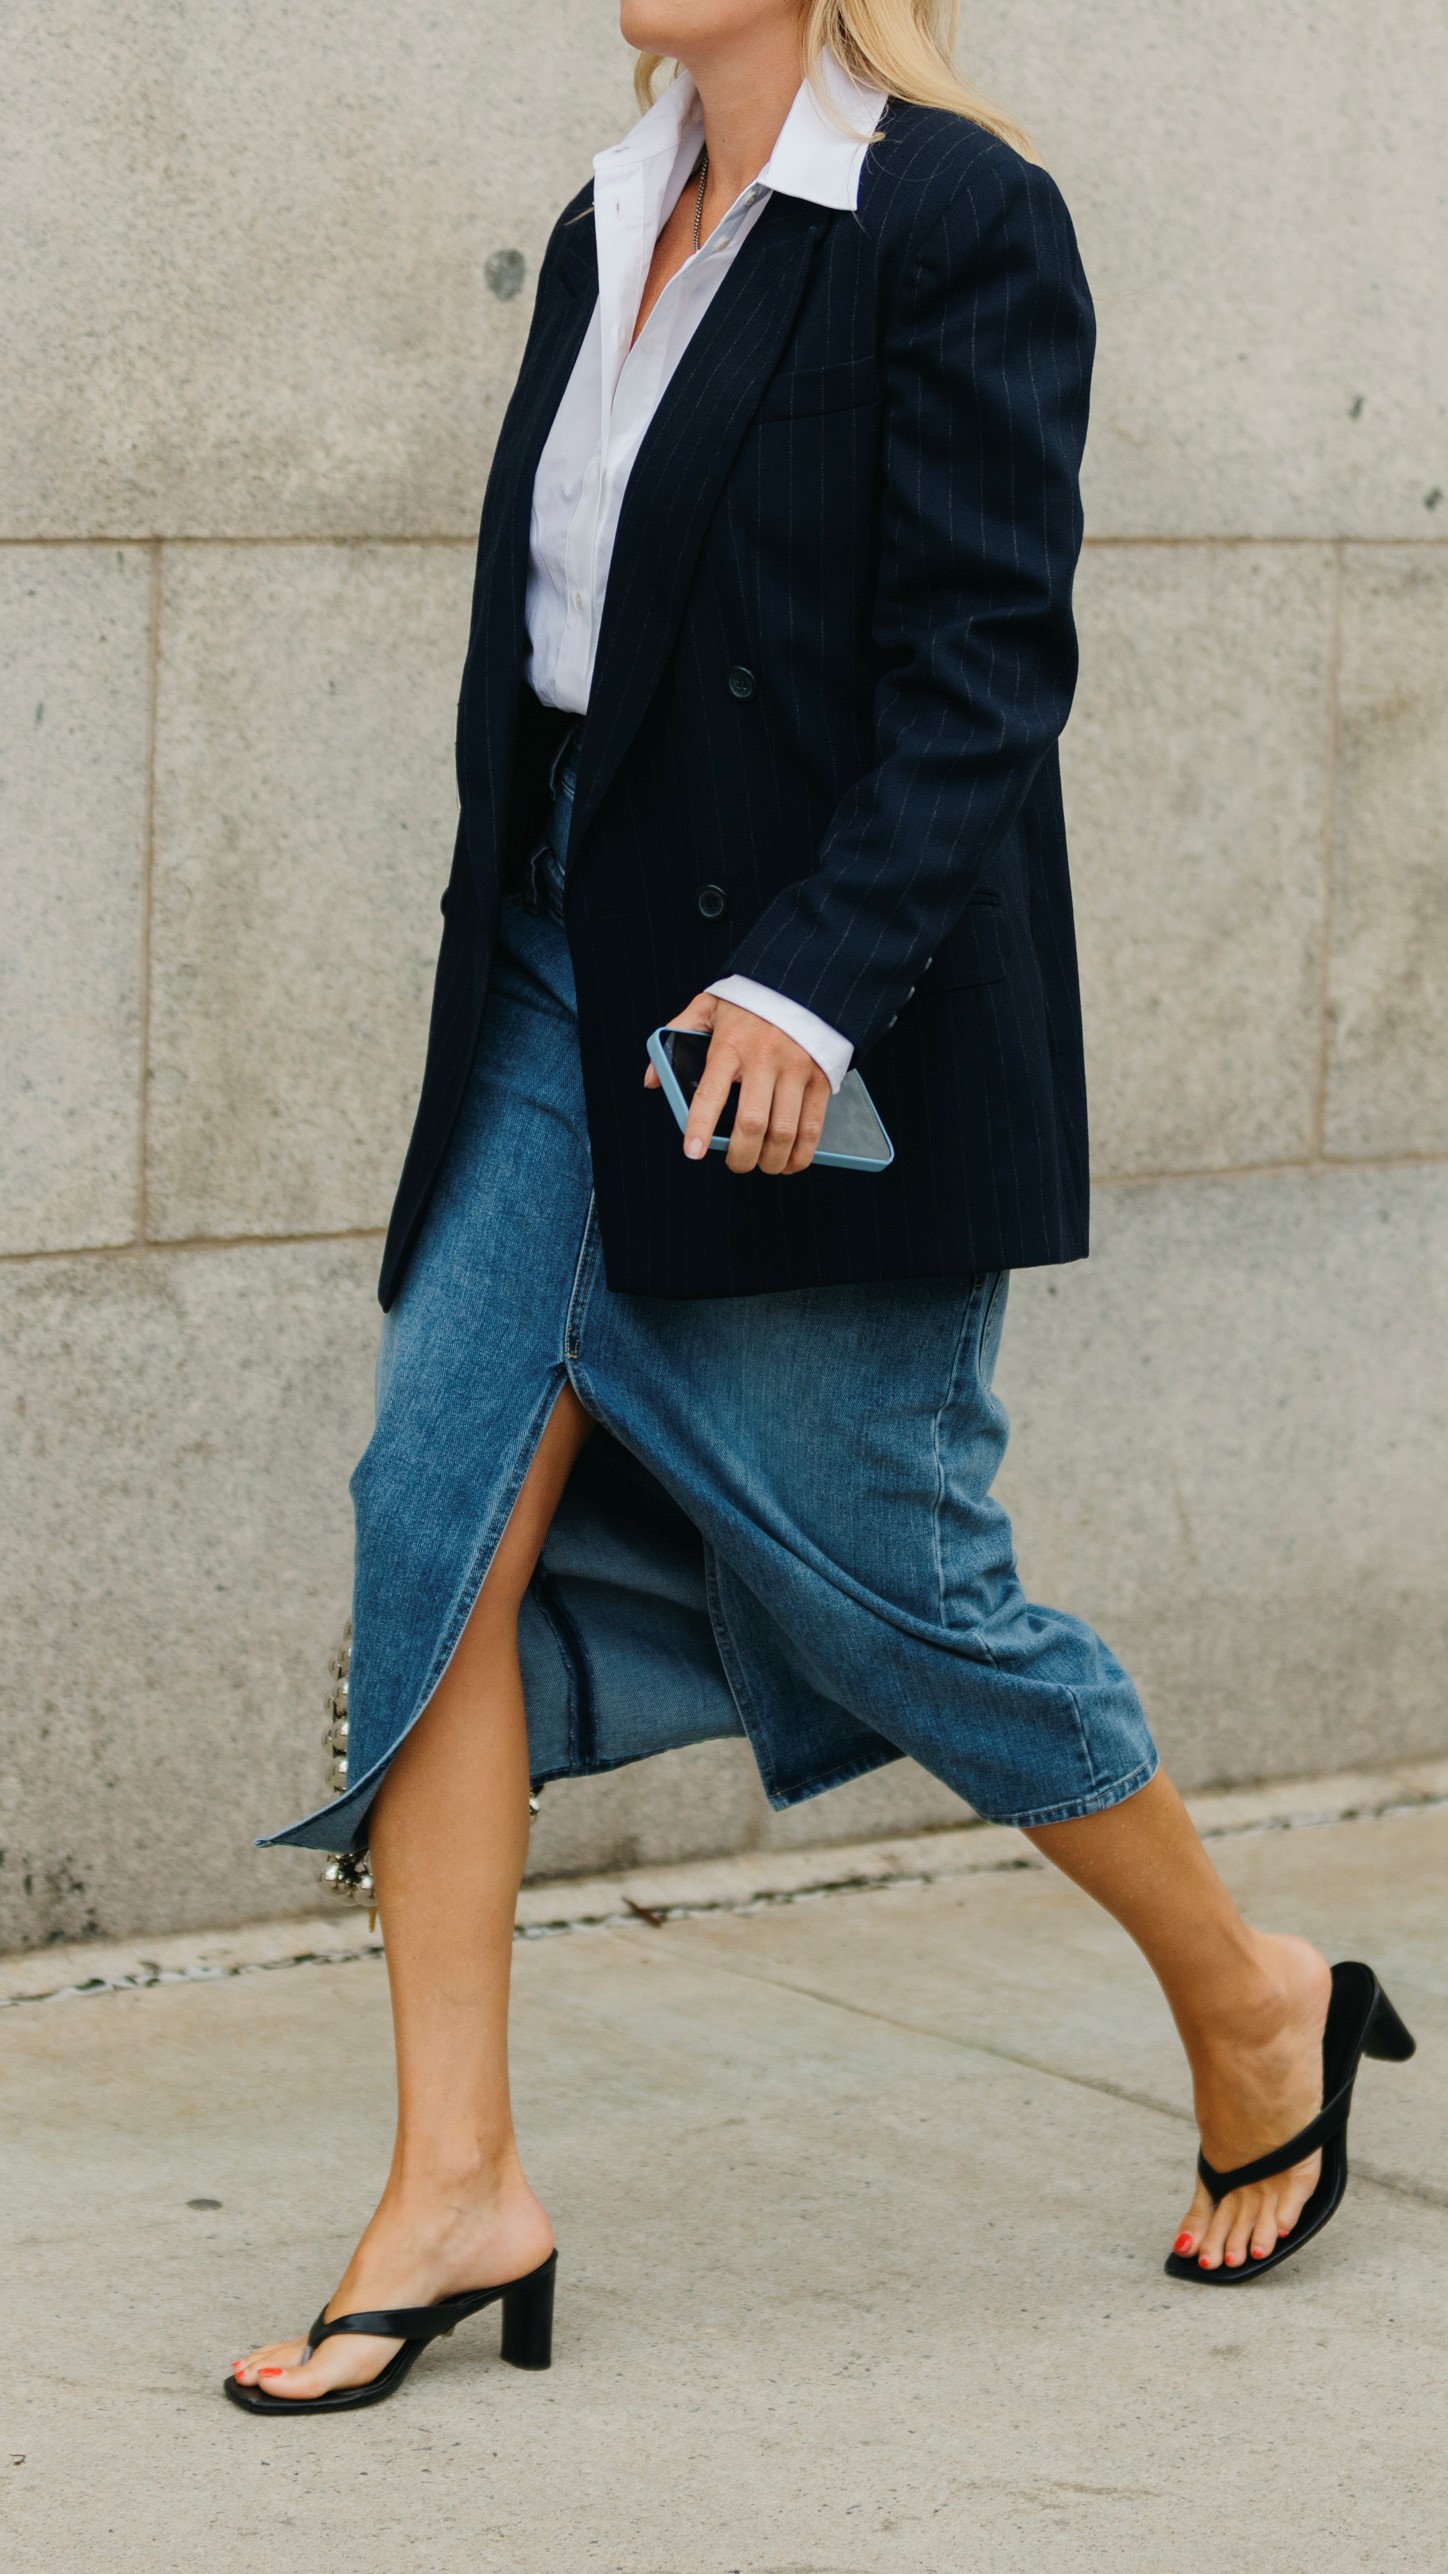 An insider with a blazer and denim skirt in the 'street-style'.